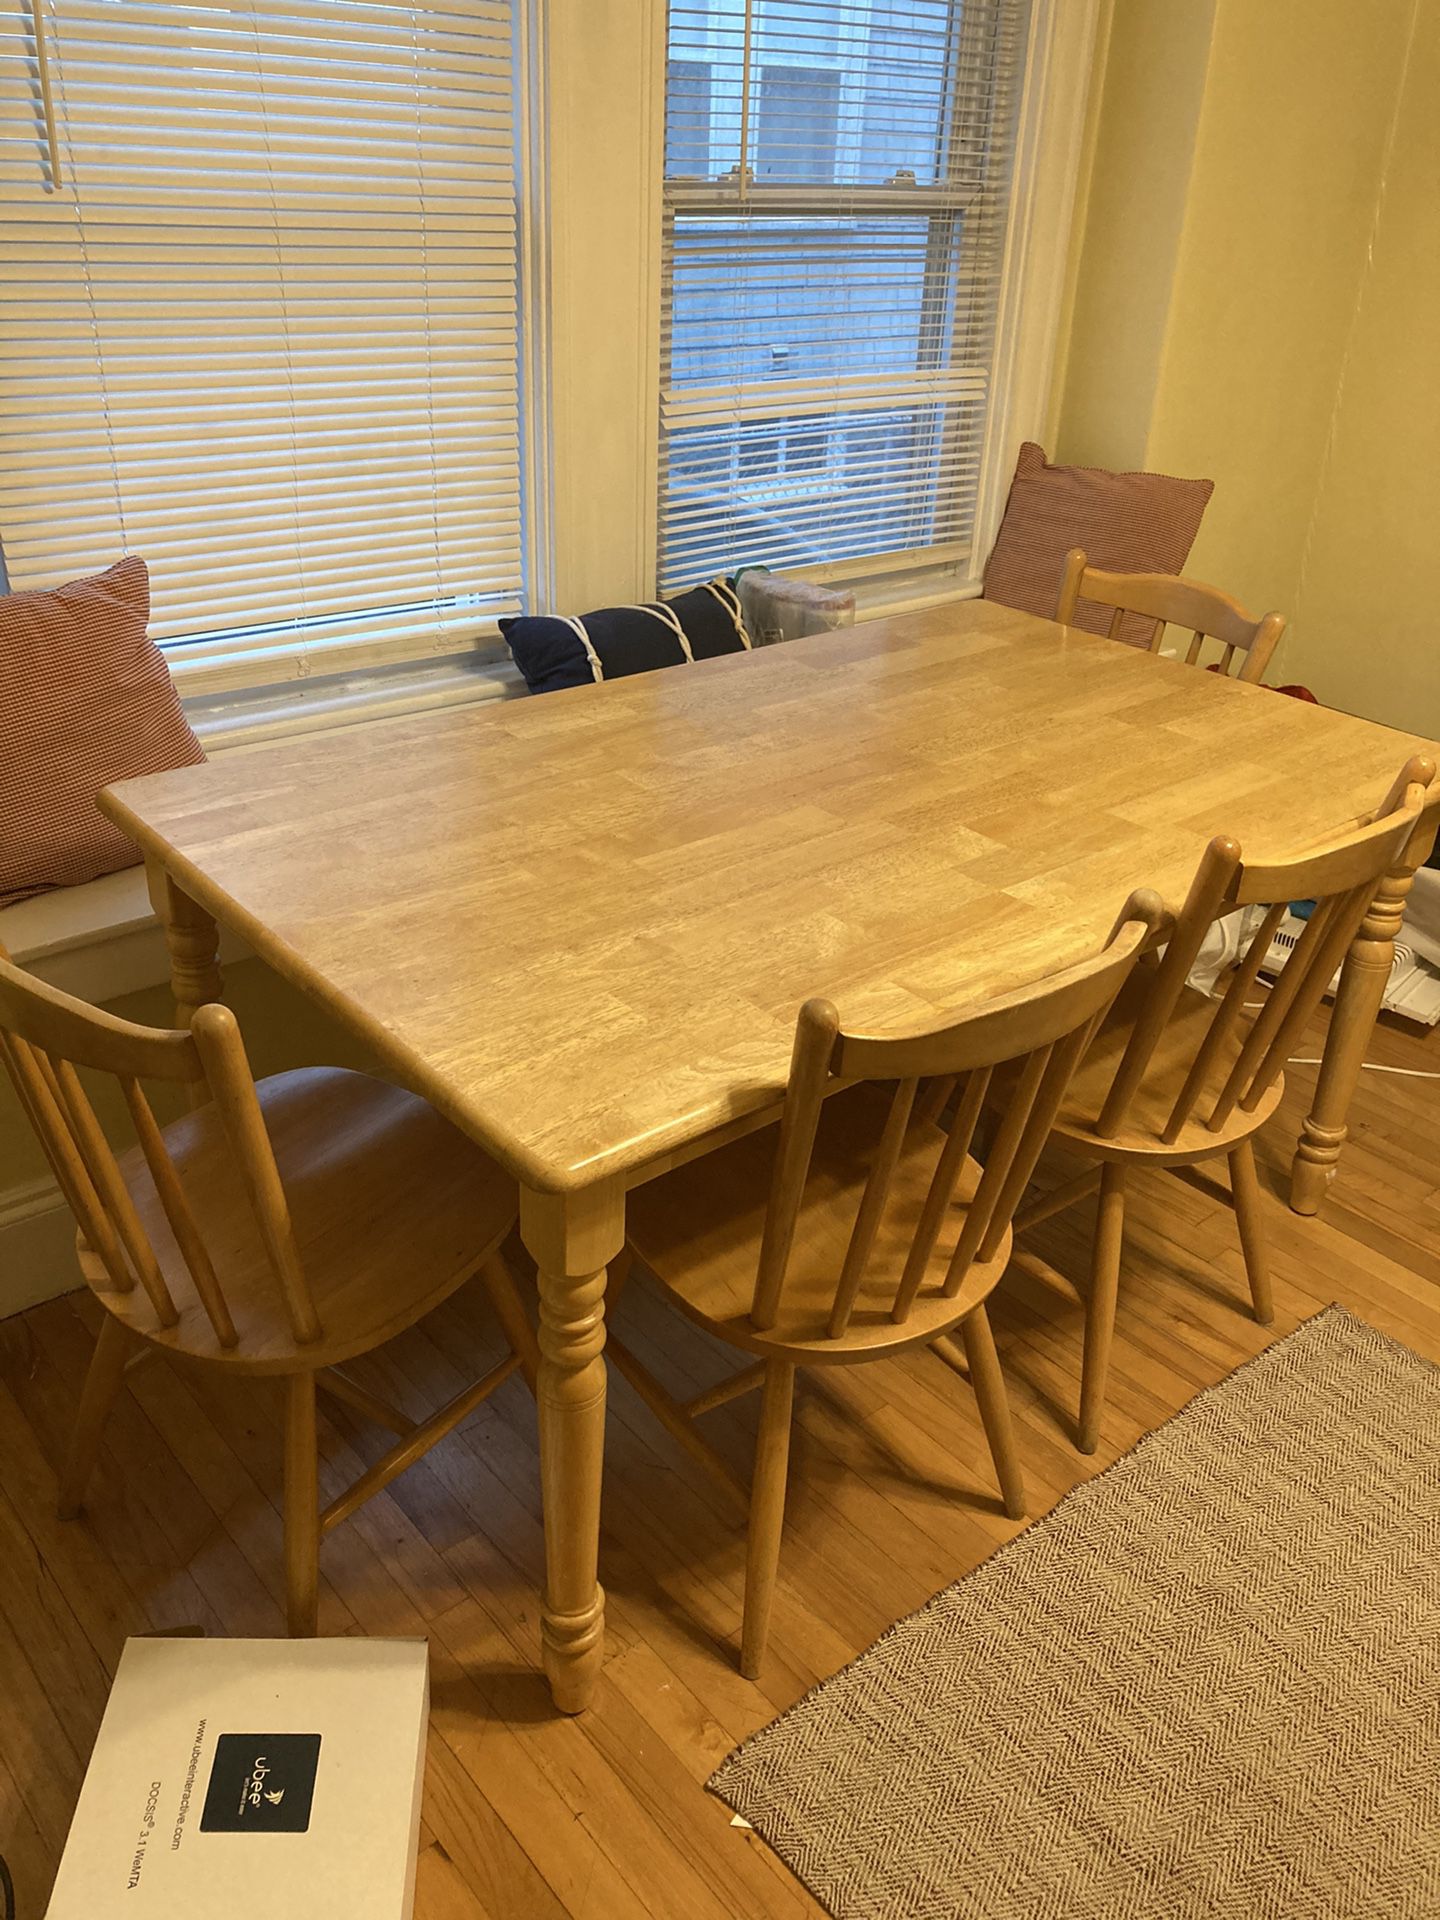 Kitchen table with 4 chairs - great quality